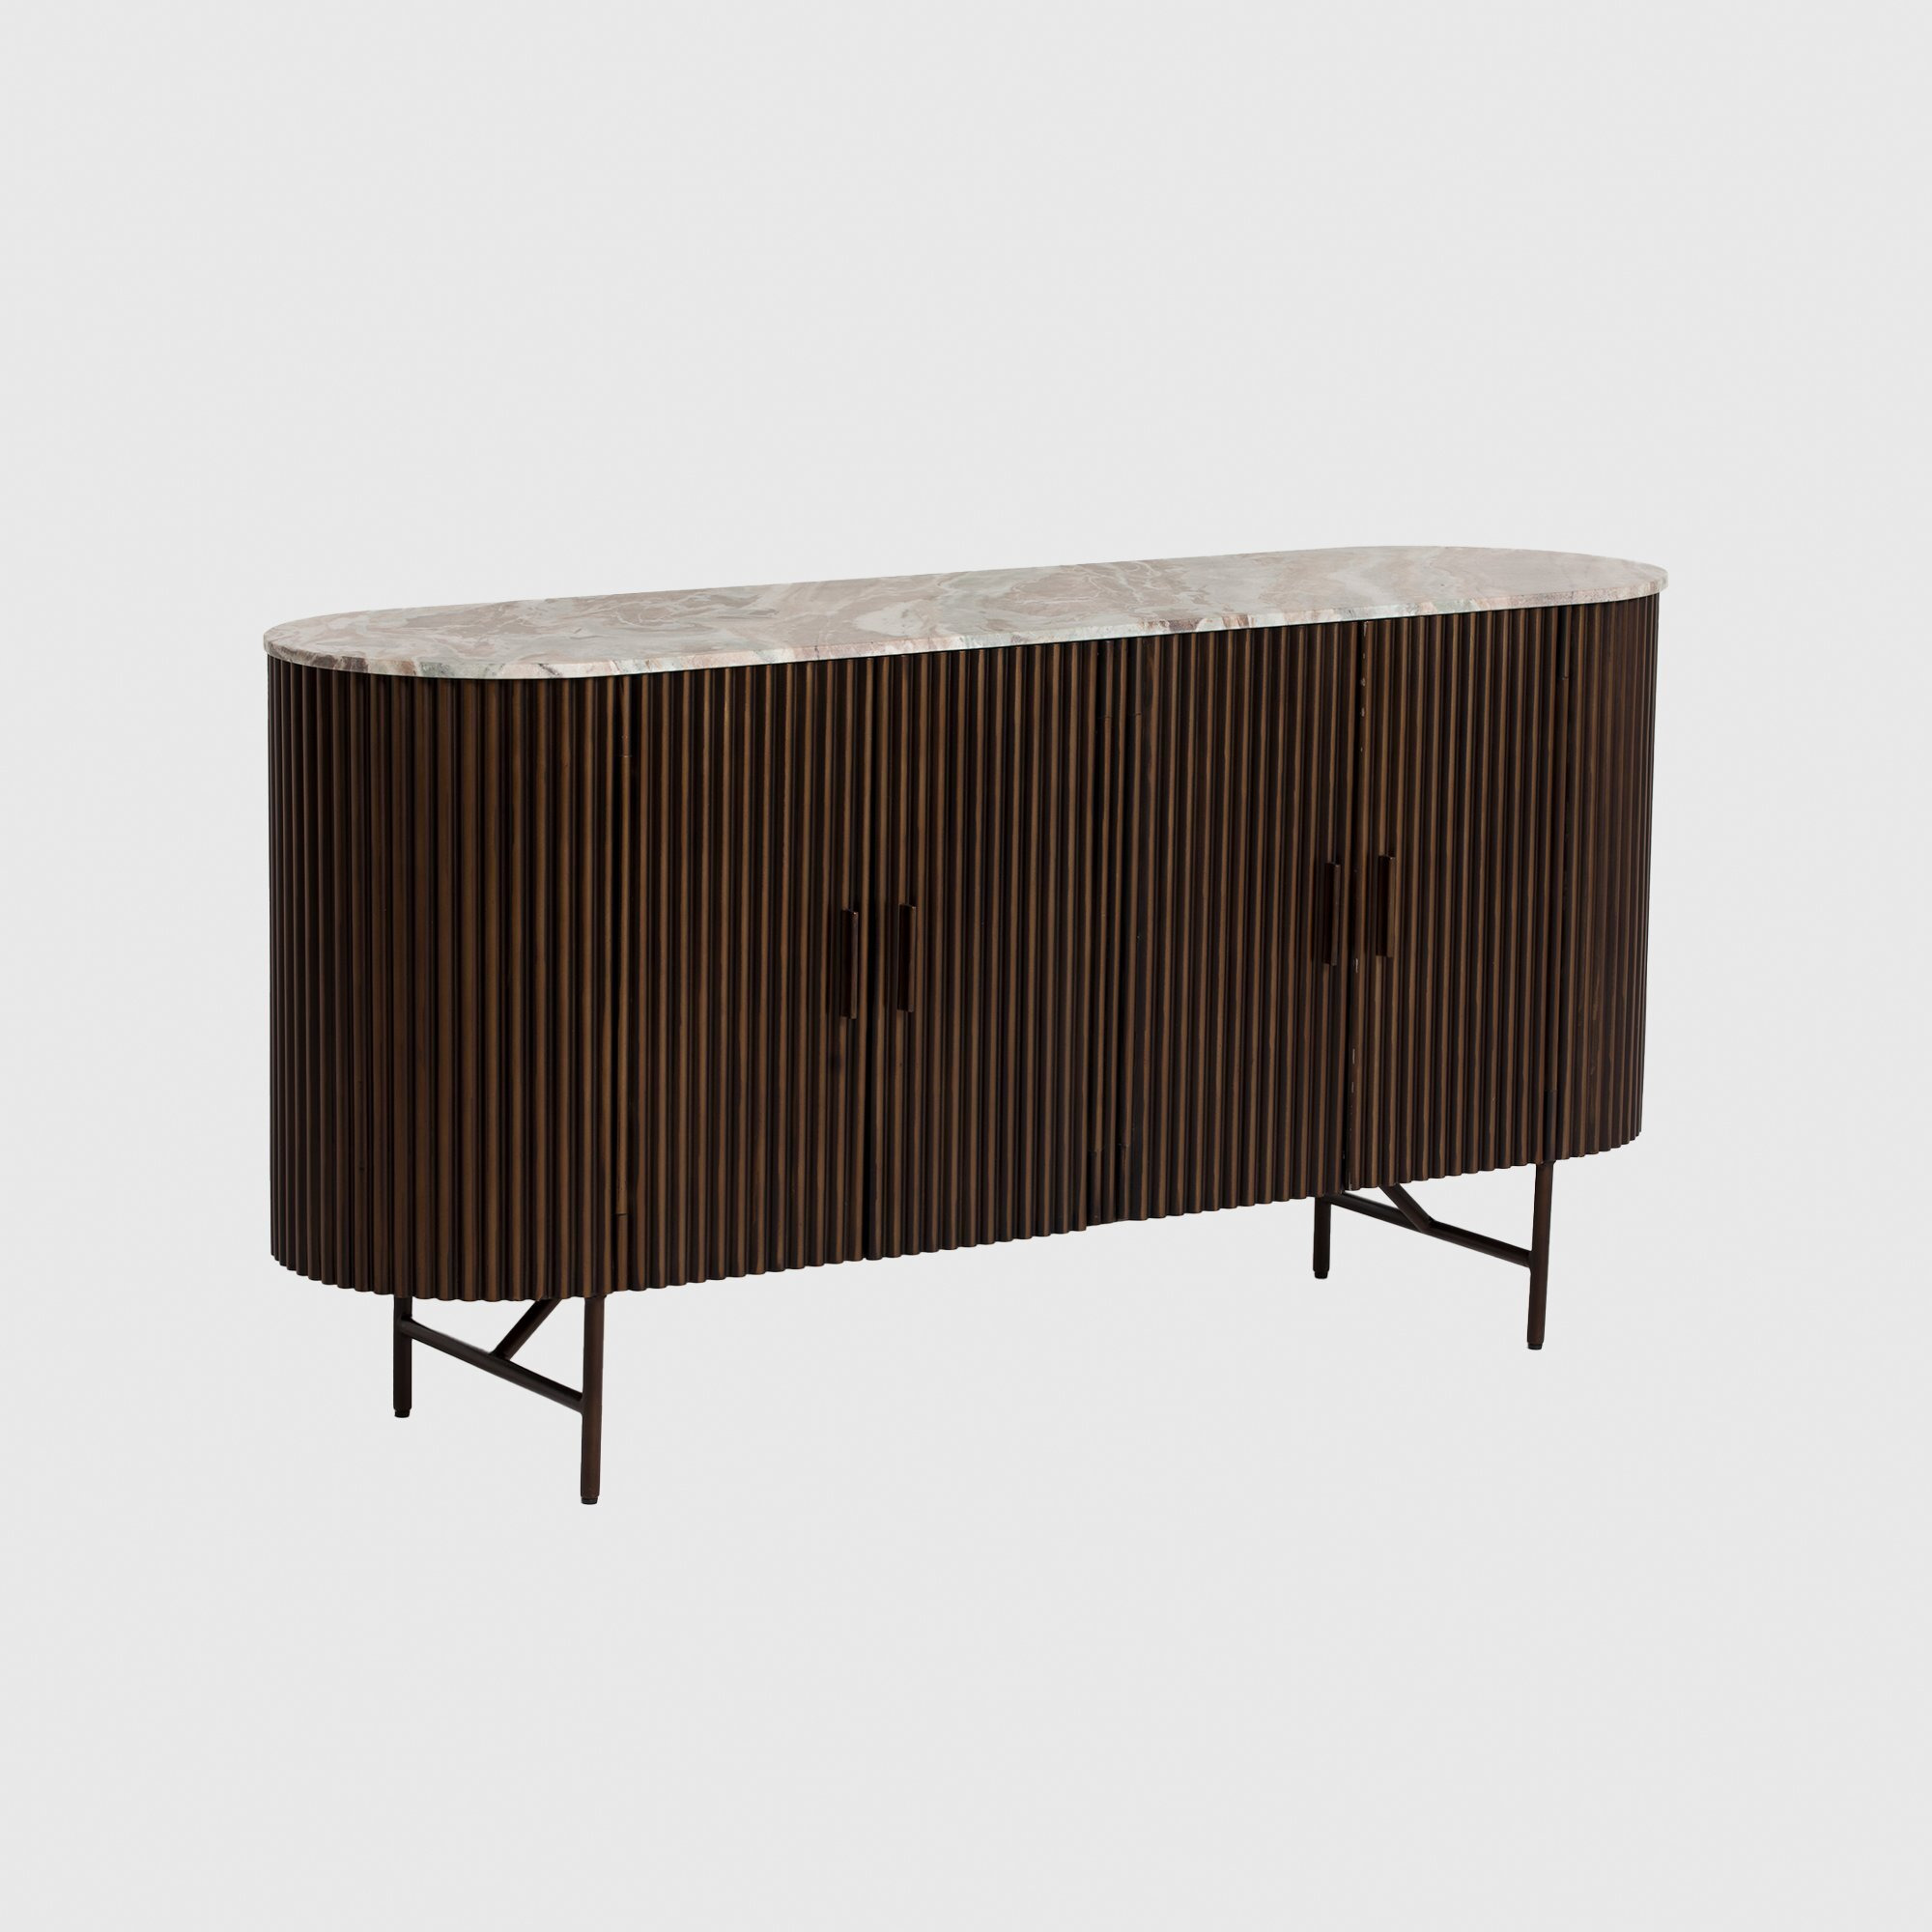 Gion 4 Door Sideboard, Brown Marble - Barker & Stonehouse - image 1